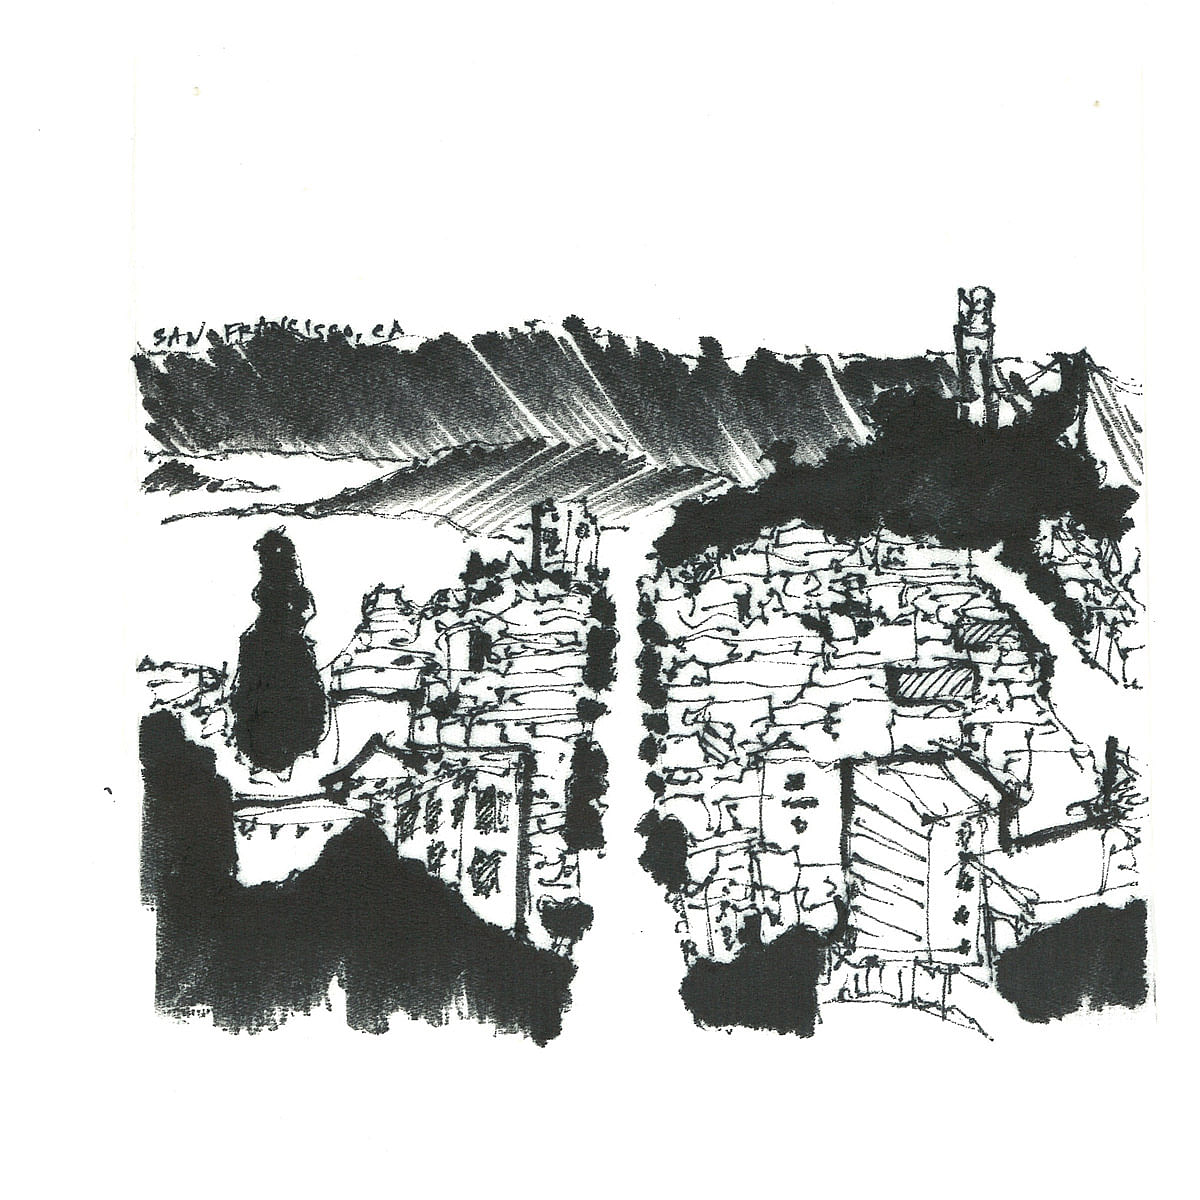 Results of the AIA Philadelphia Napkin Sketch Competition